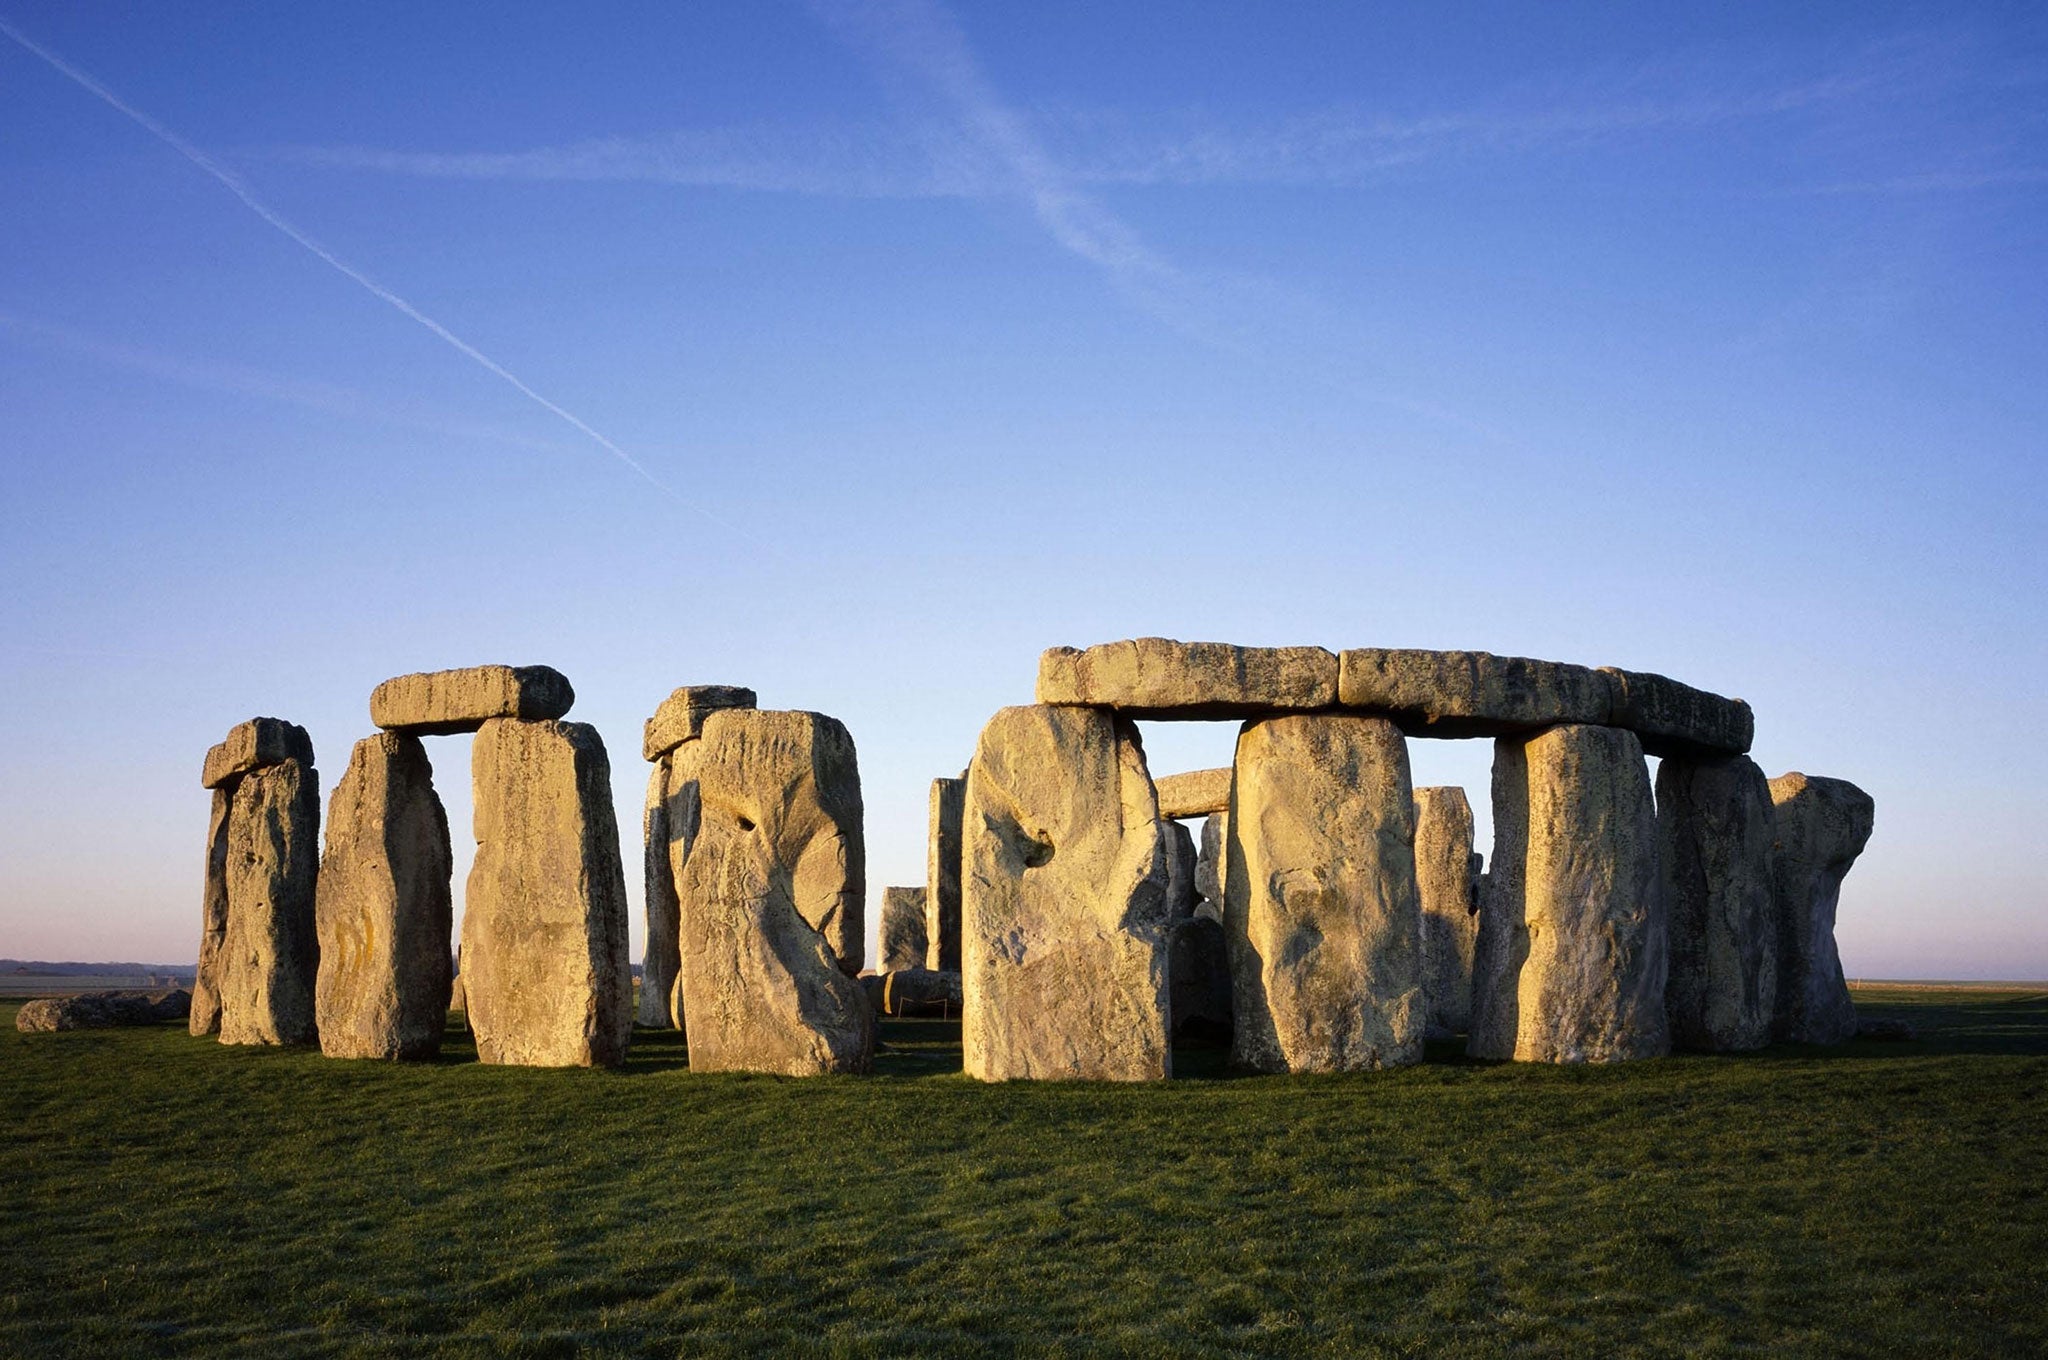 The Stonehenge monument served as an ancient solar calendar, according to research